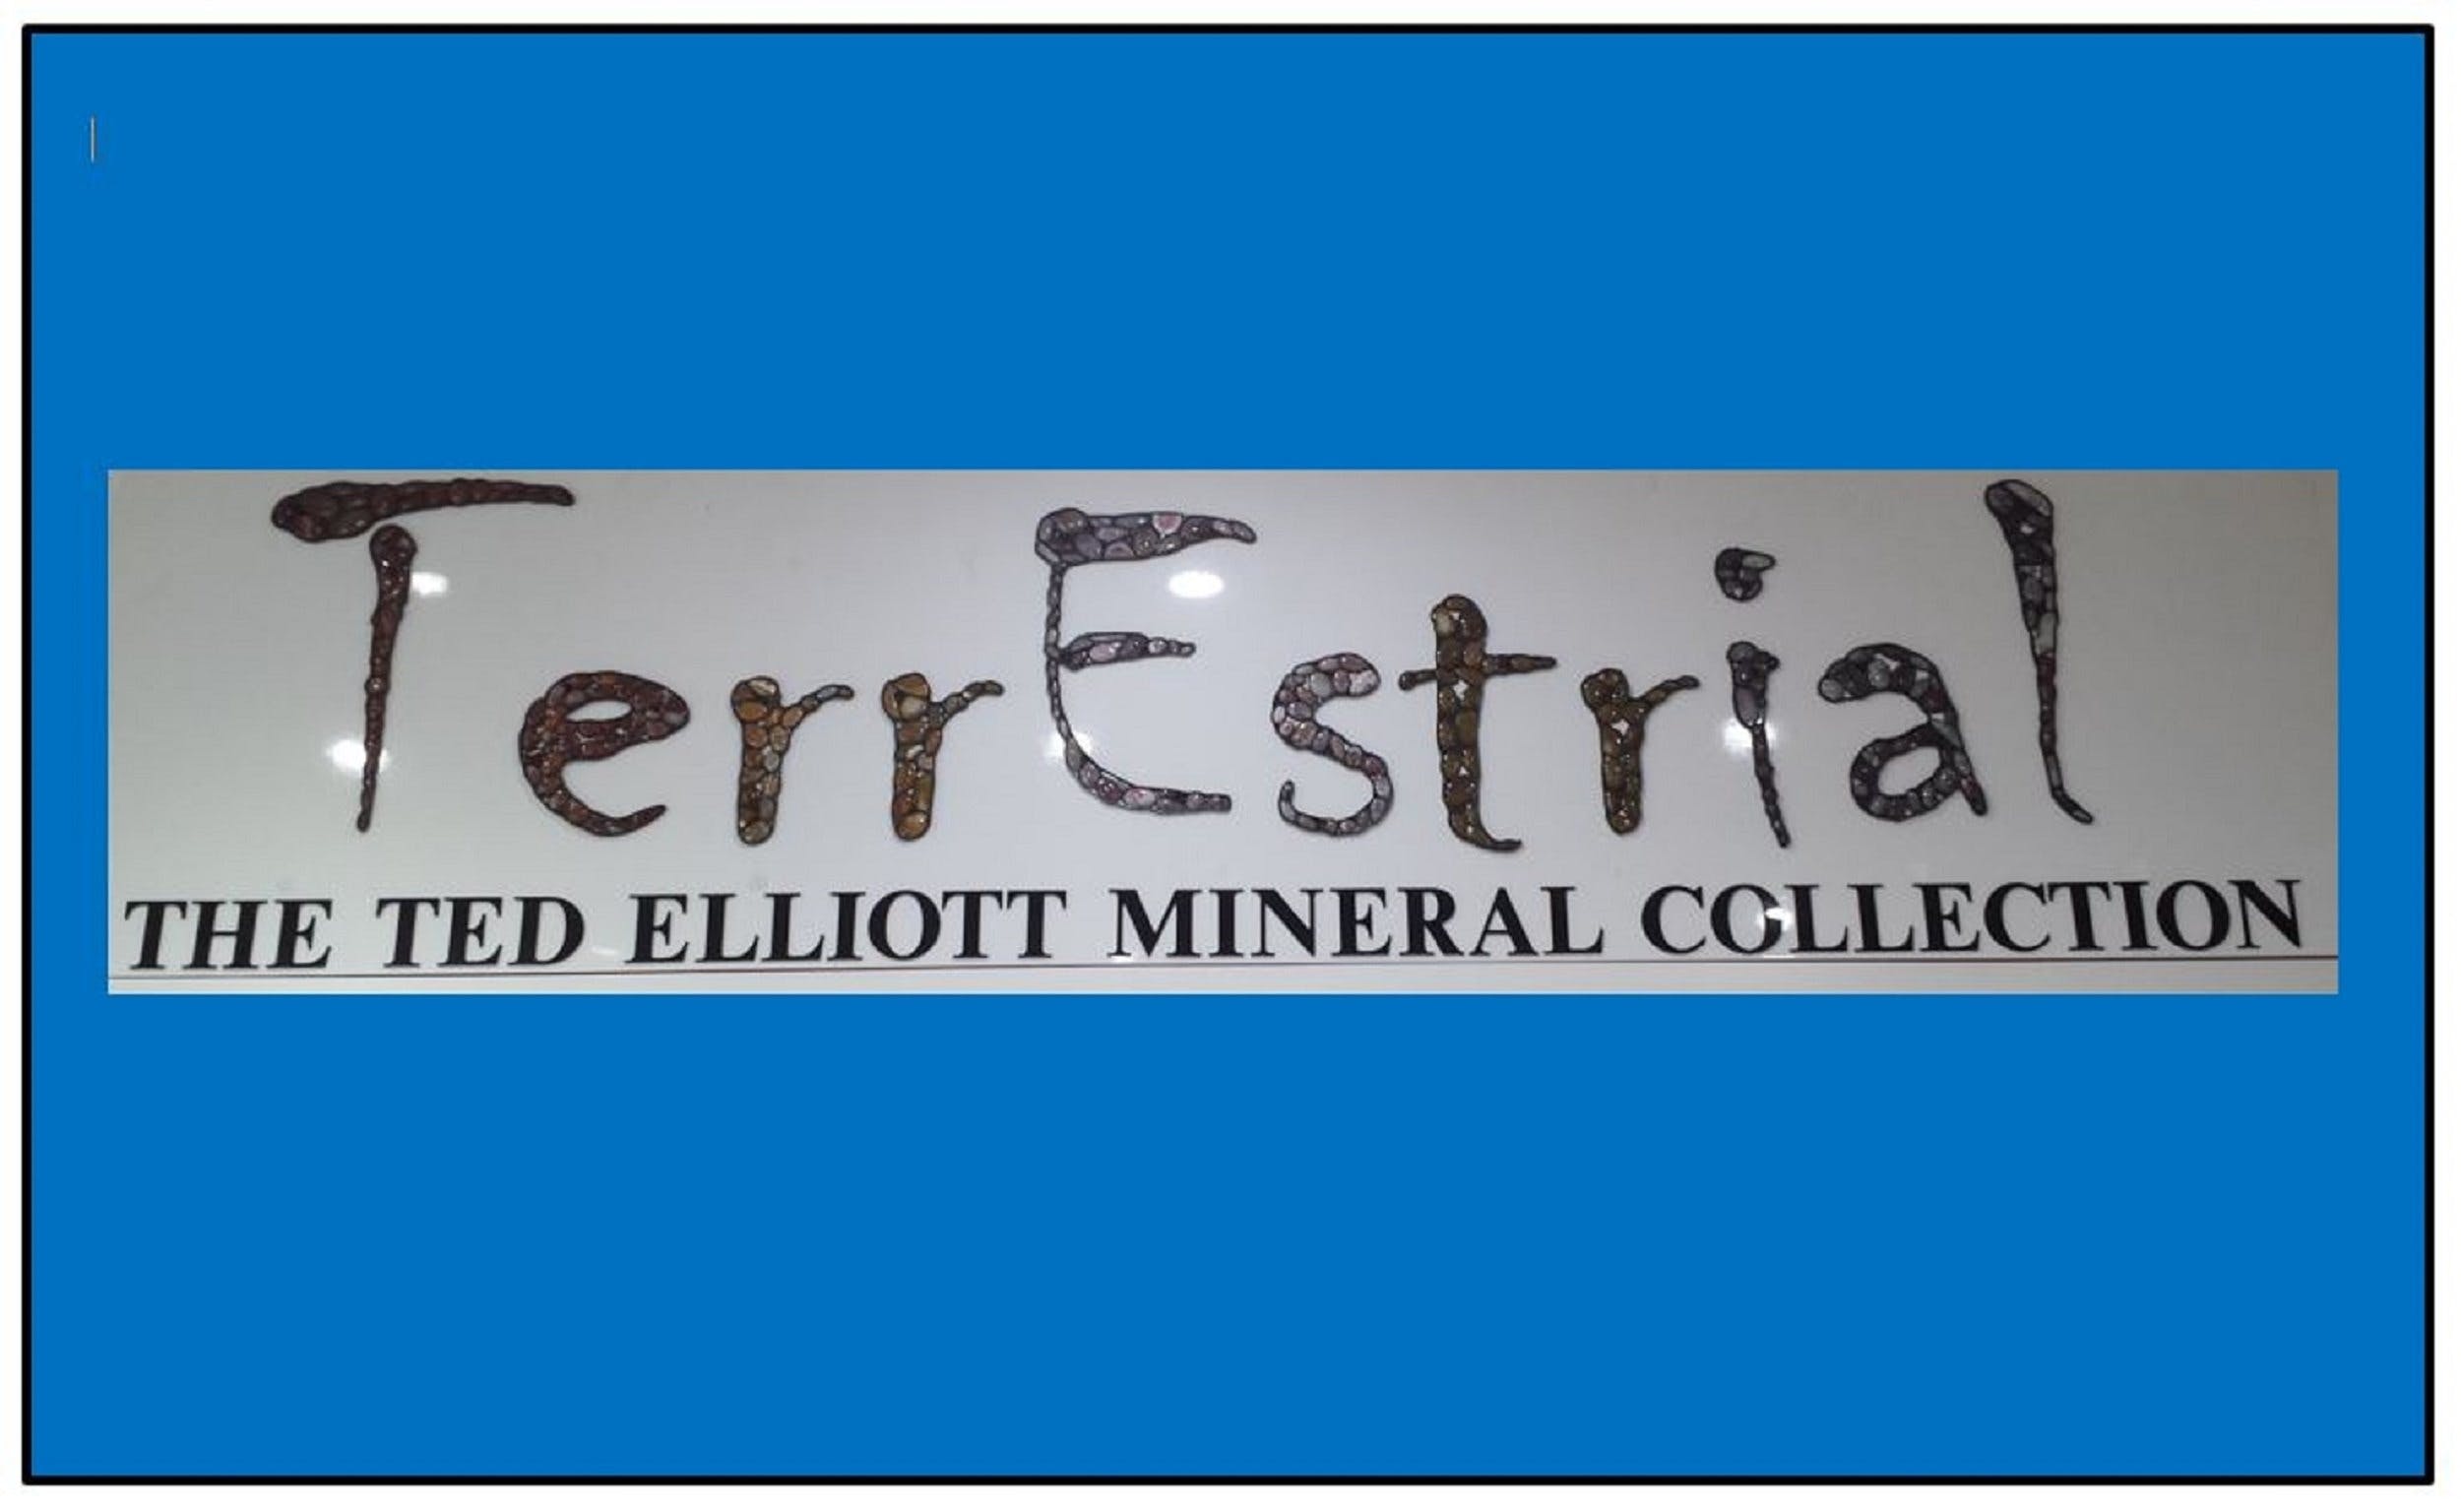 The Ted Elliott Mineral Collection - Attractions Brisbane